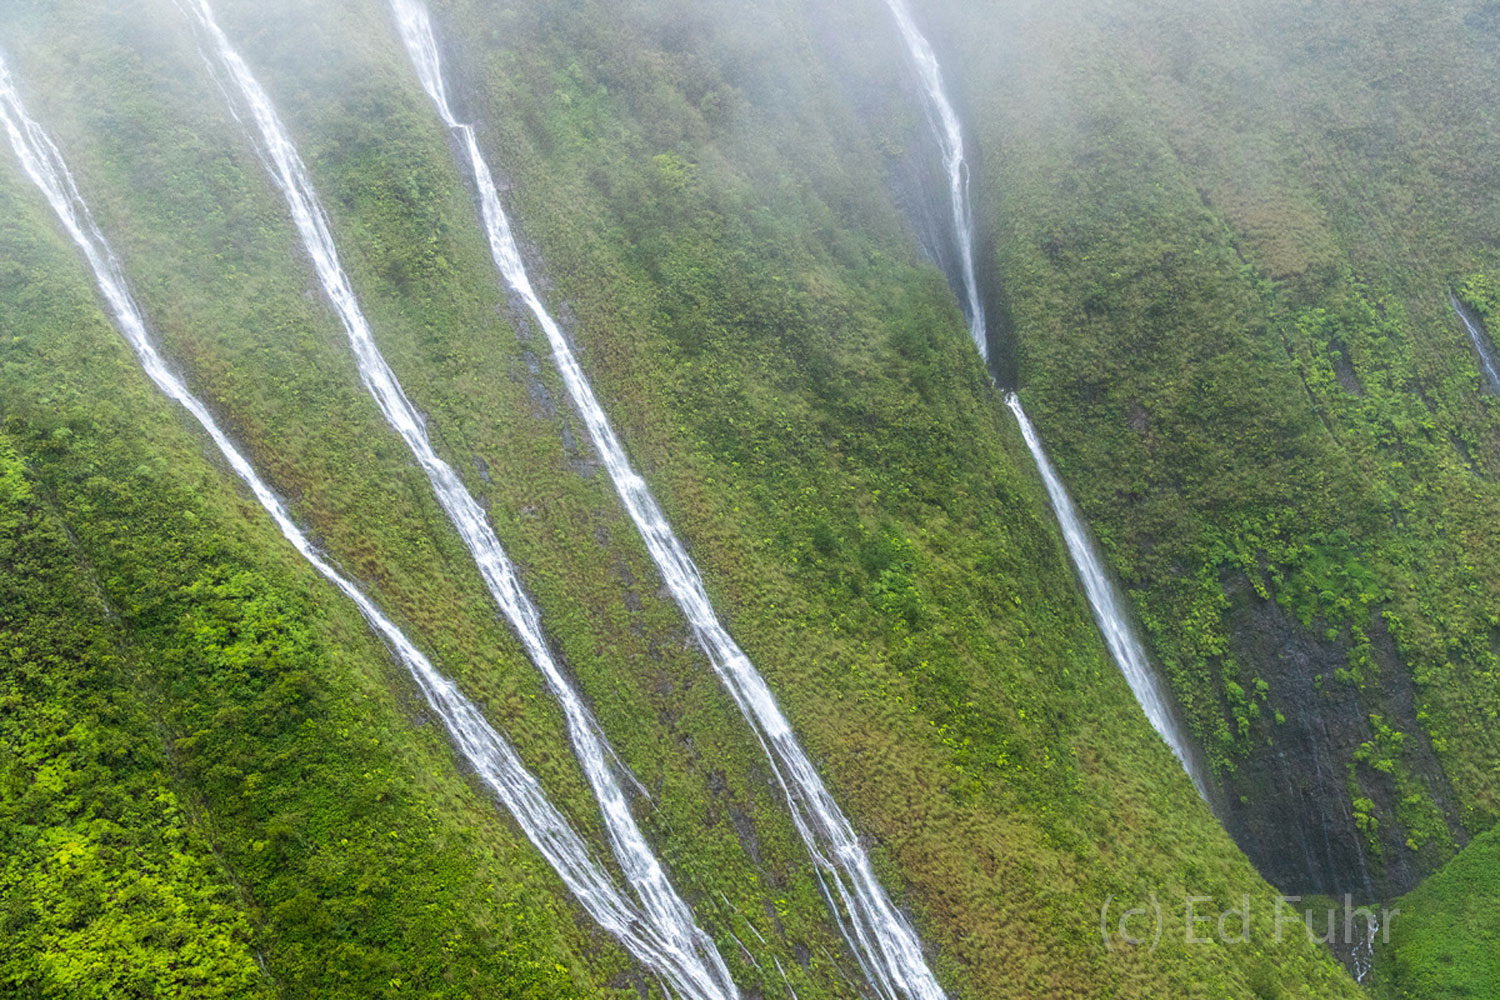 Heavy rains often create hundreds of waterfalls that will flow for a day or two down the steep green sides of Kauai's mountains...